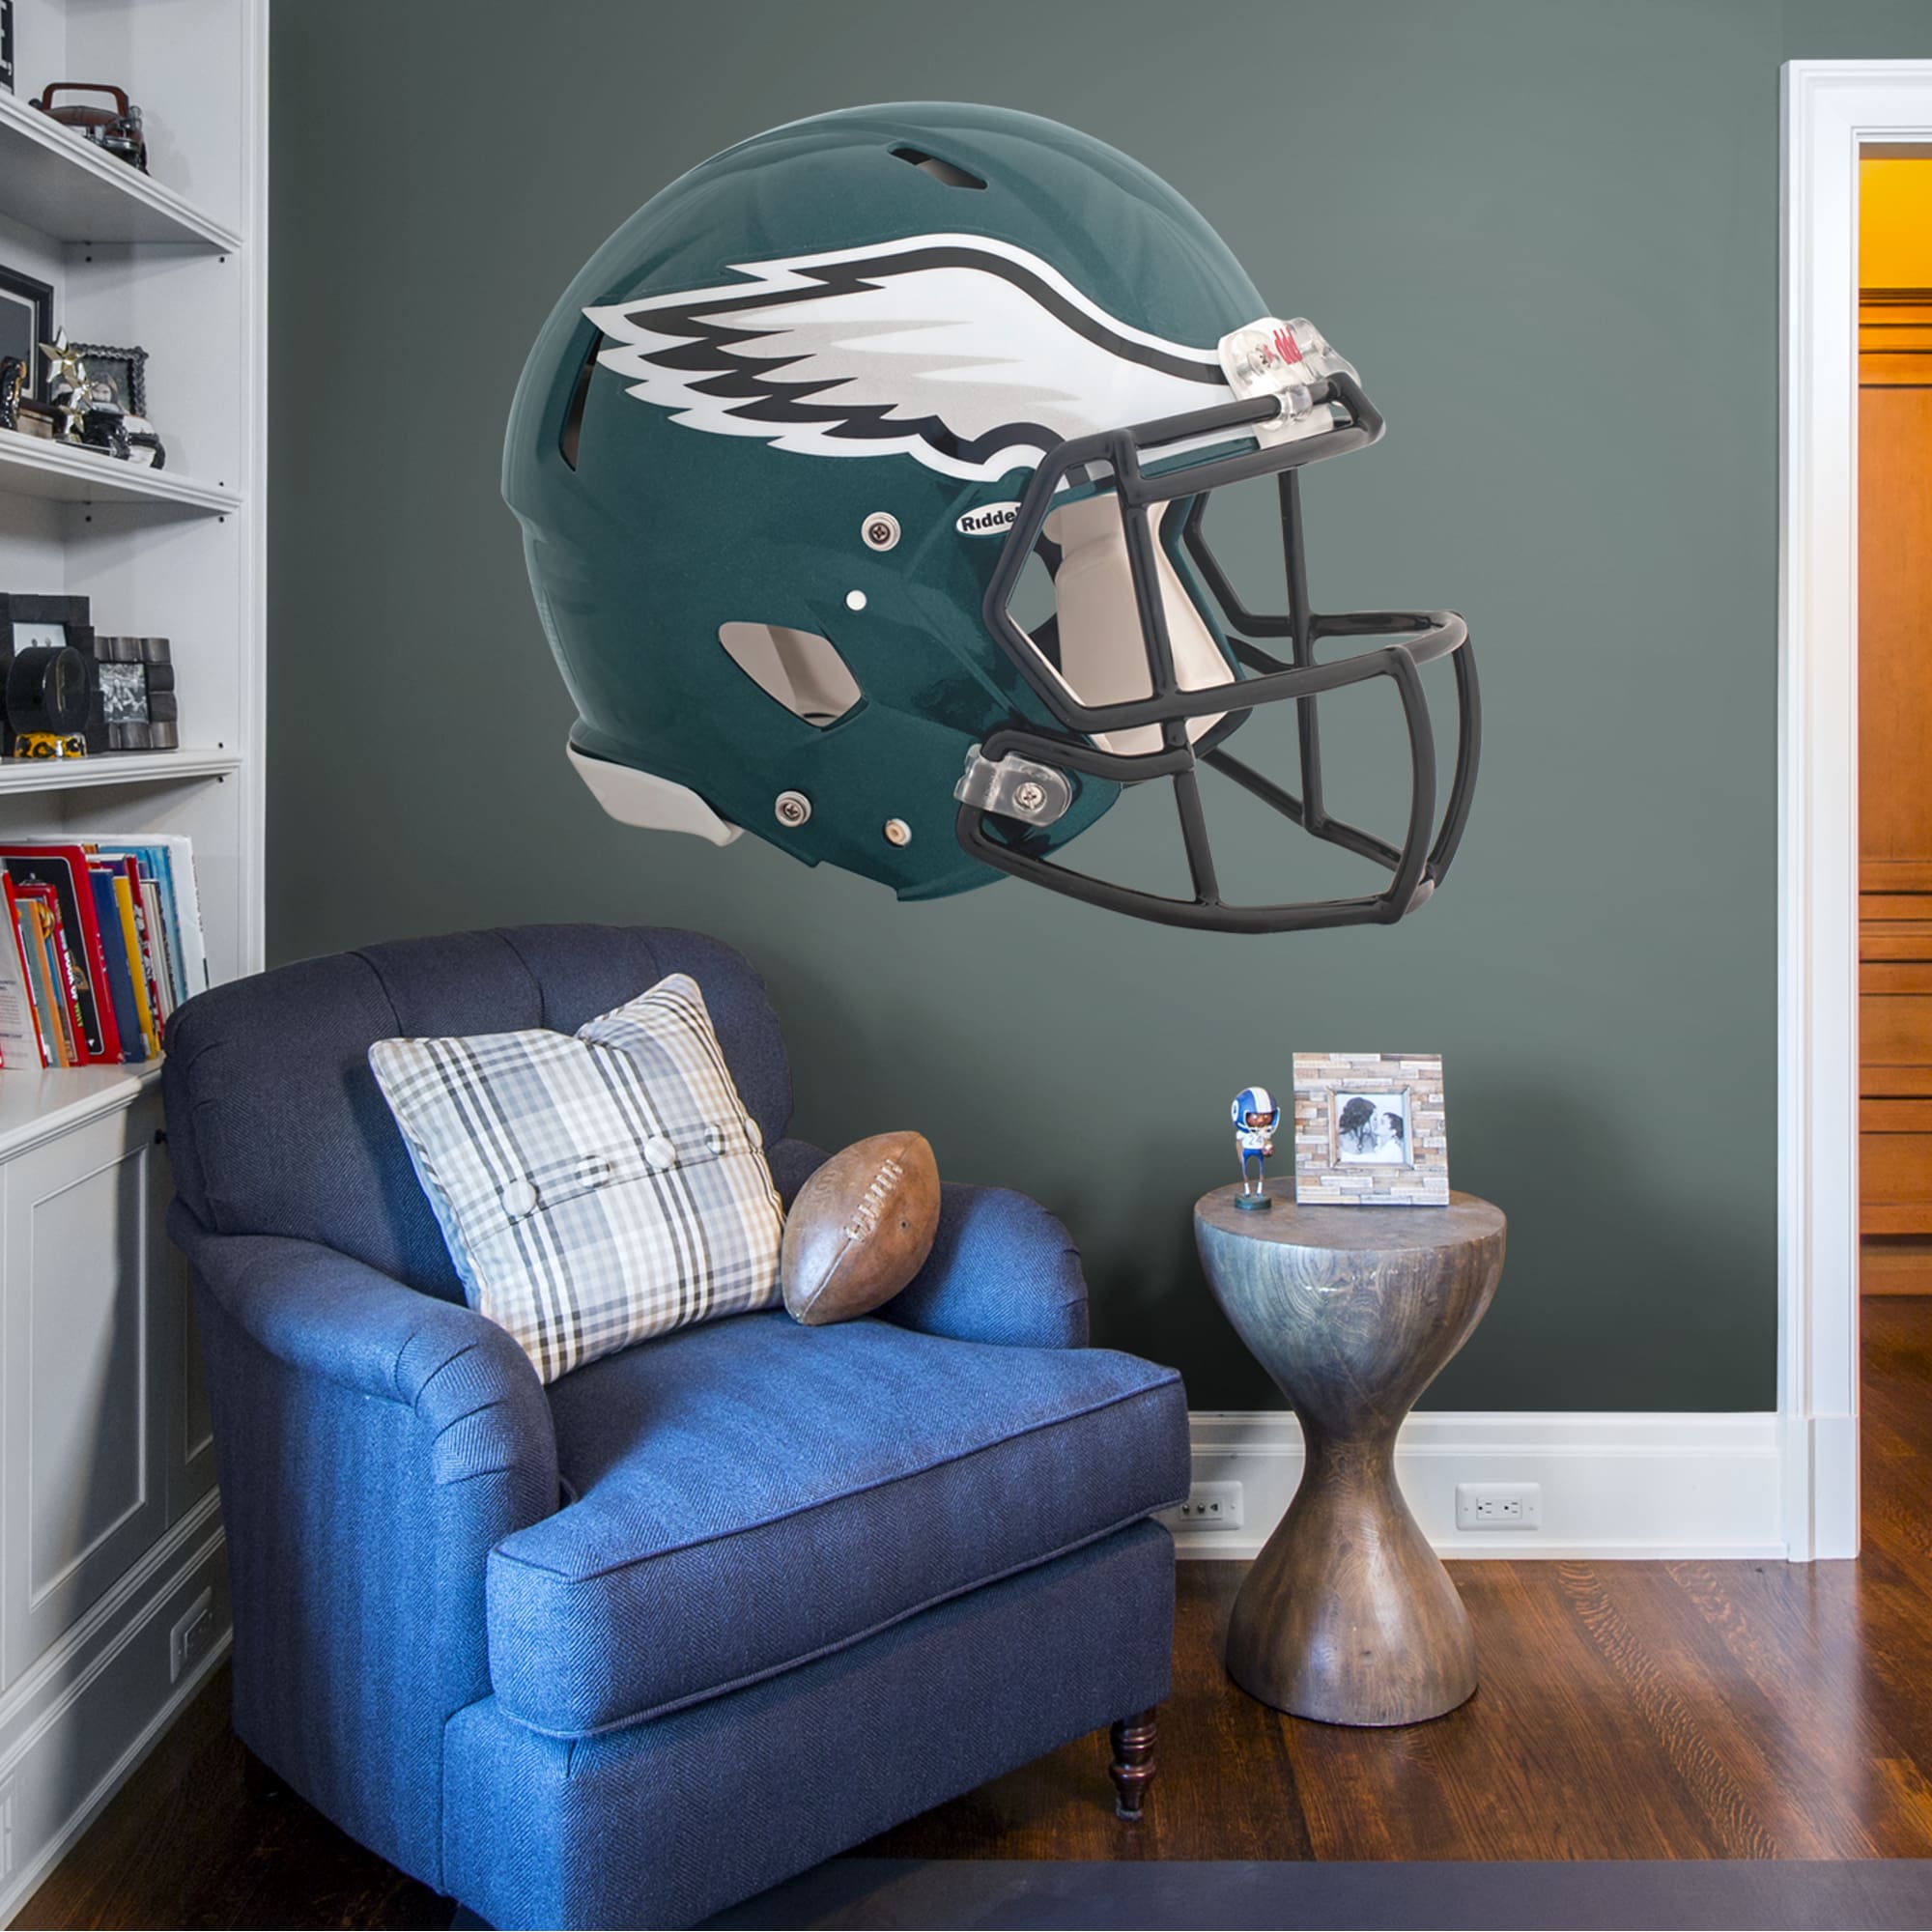 Philadelphia Eagles: Helmet - Officially Licensed NFL Removable Wall Decal Giant Helmet (56"W x 45"H) by Fathead | Vinyl